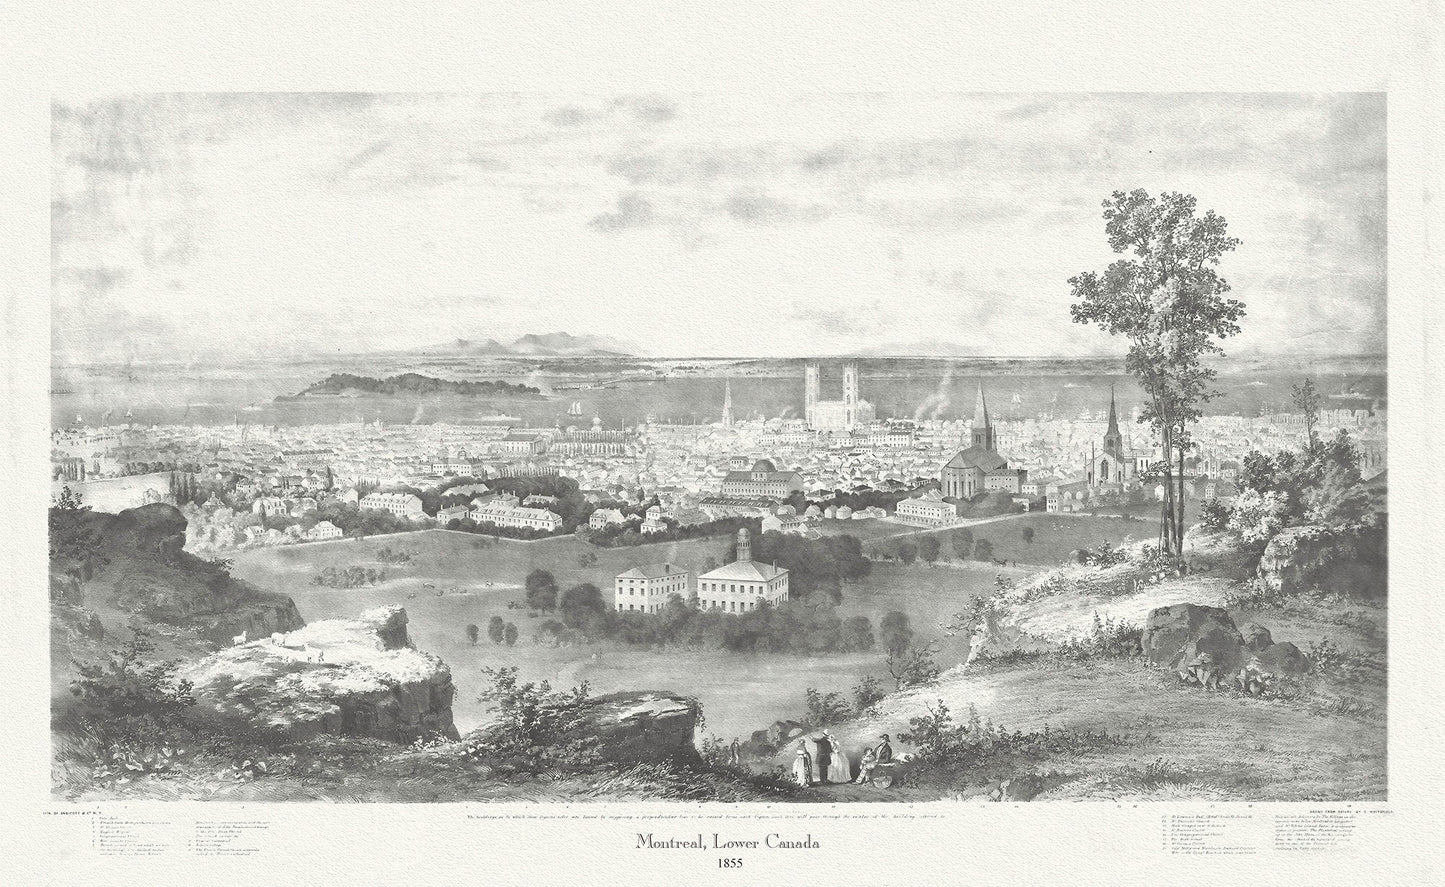 Montreal, Lower Canada, 1855, Whitfield auth., vintage print reprinted on durable cotton canvas, 50 x 70 cm, 20 x 25" approx.